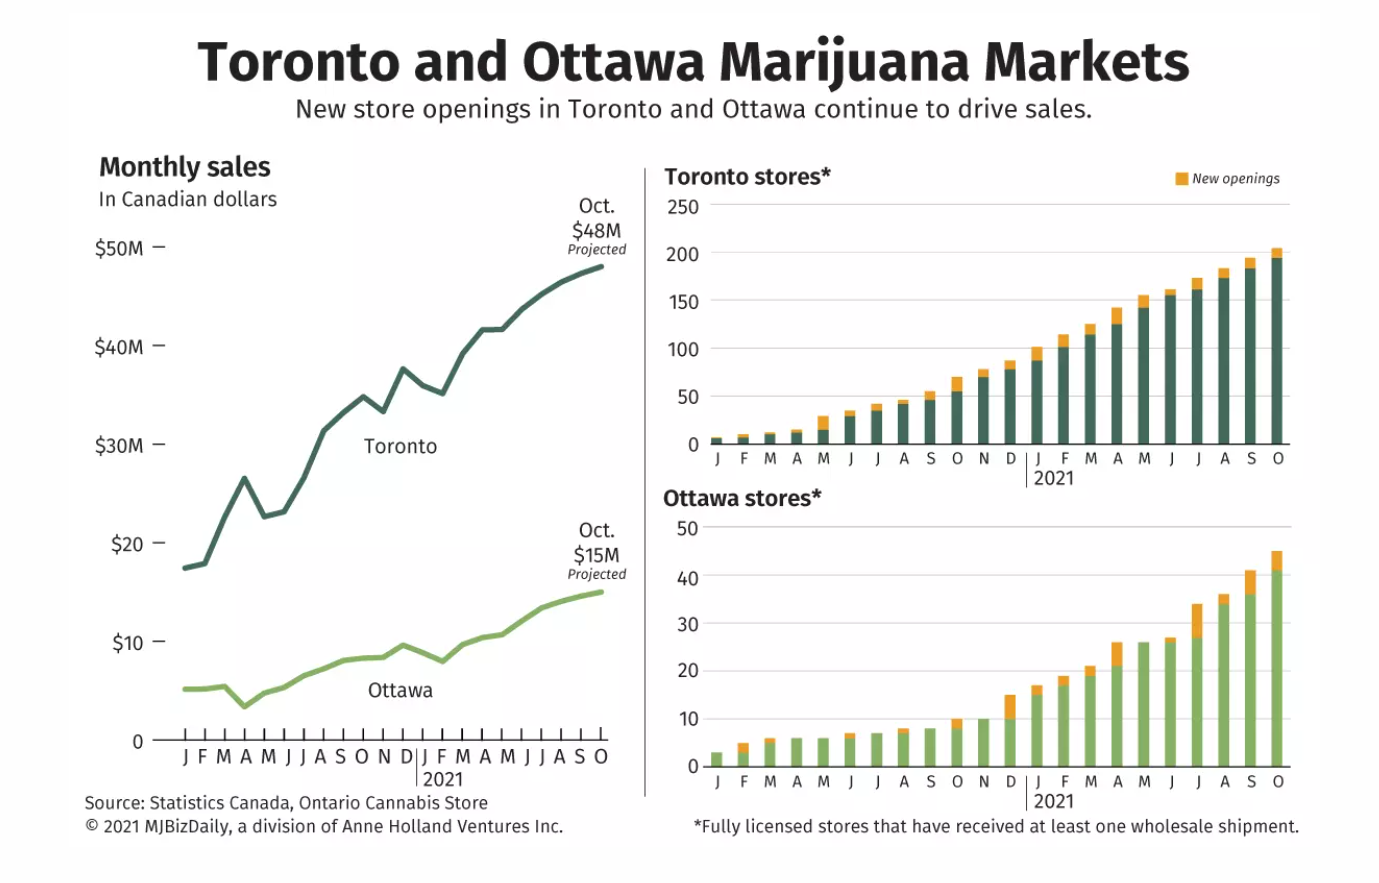 Toronto passes 200 cannabis stores, nears CA$50 million in monthly sales